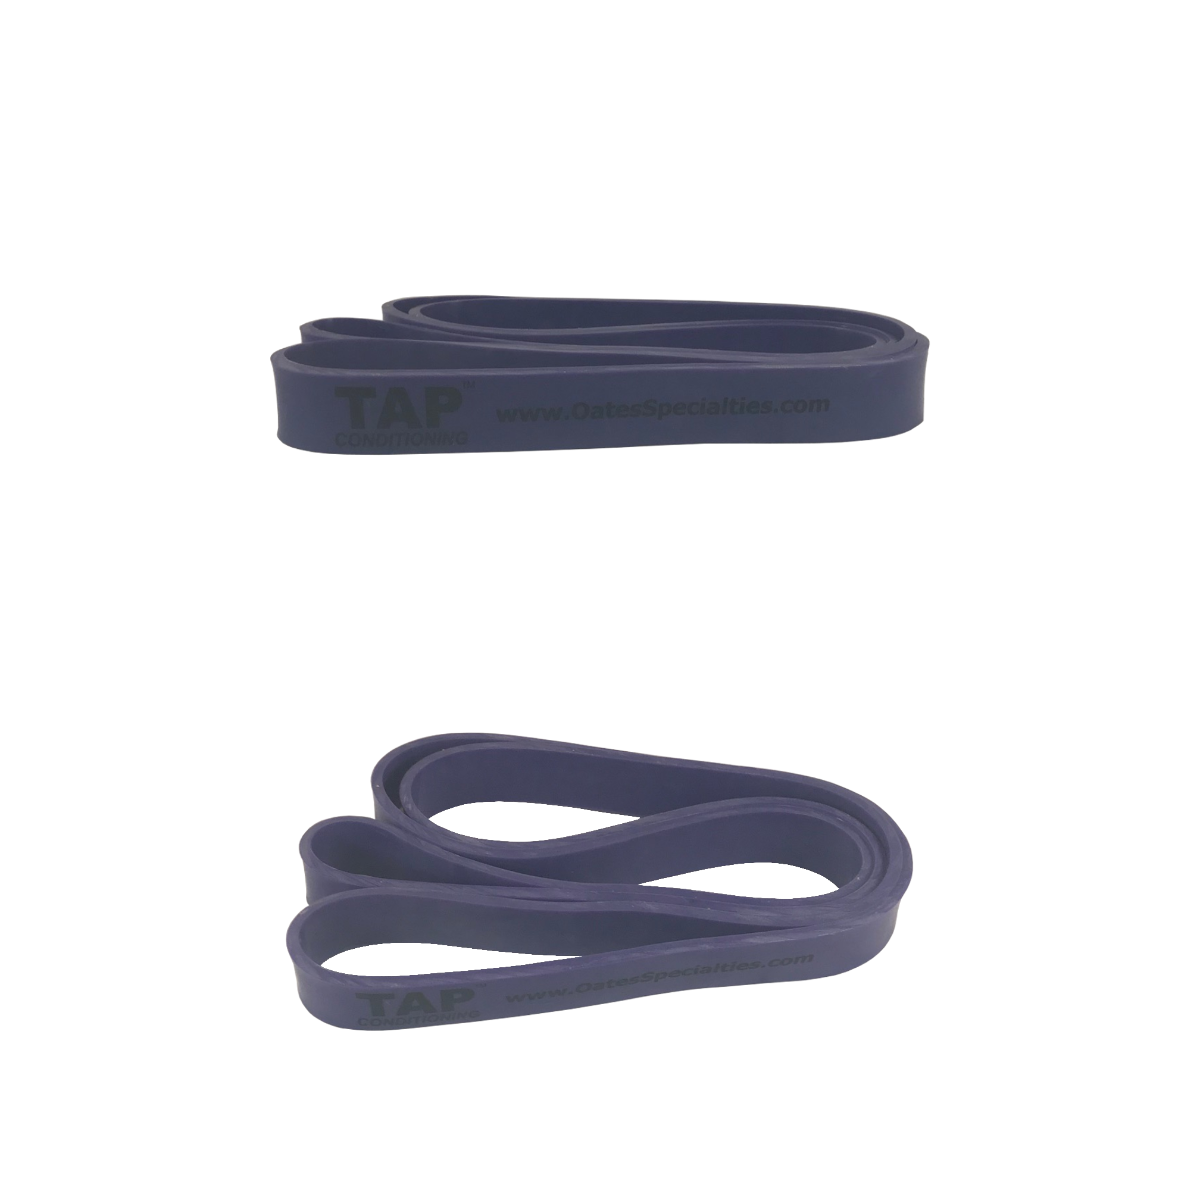 Giant Flat Bands  Bands for Pullups, Stretching, or Resisted Body